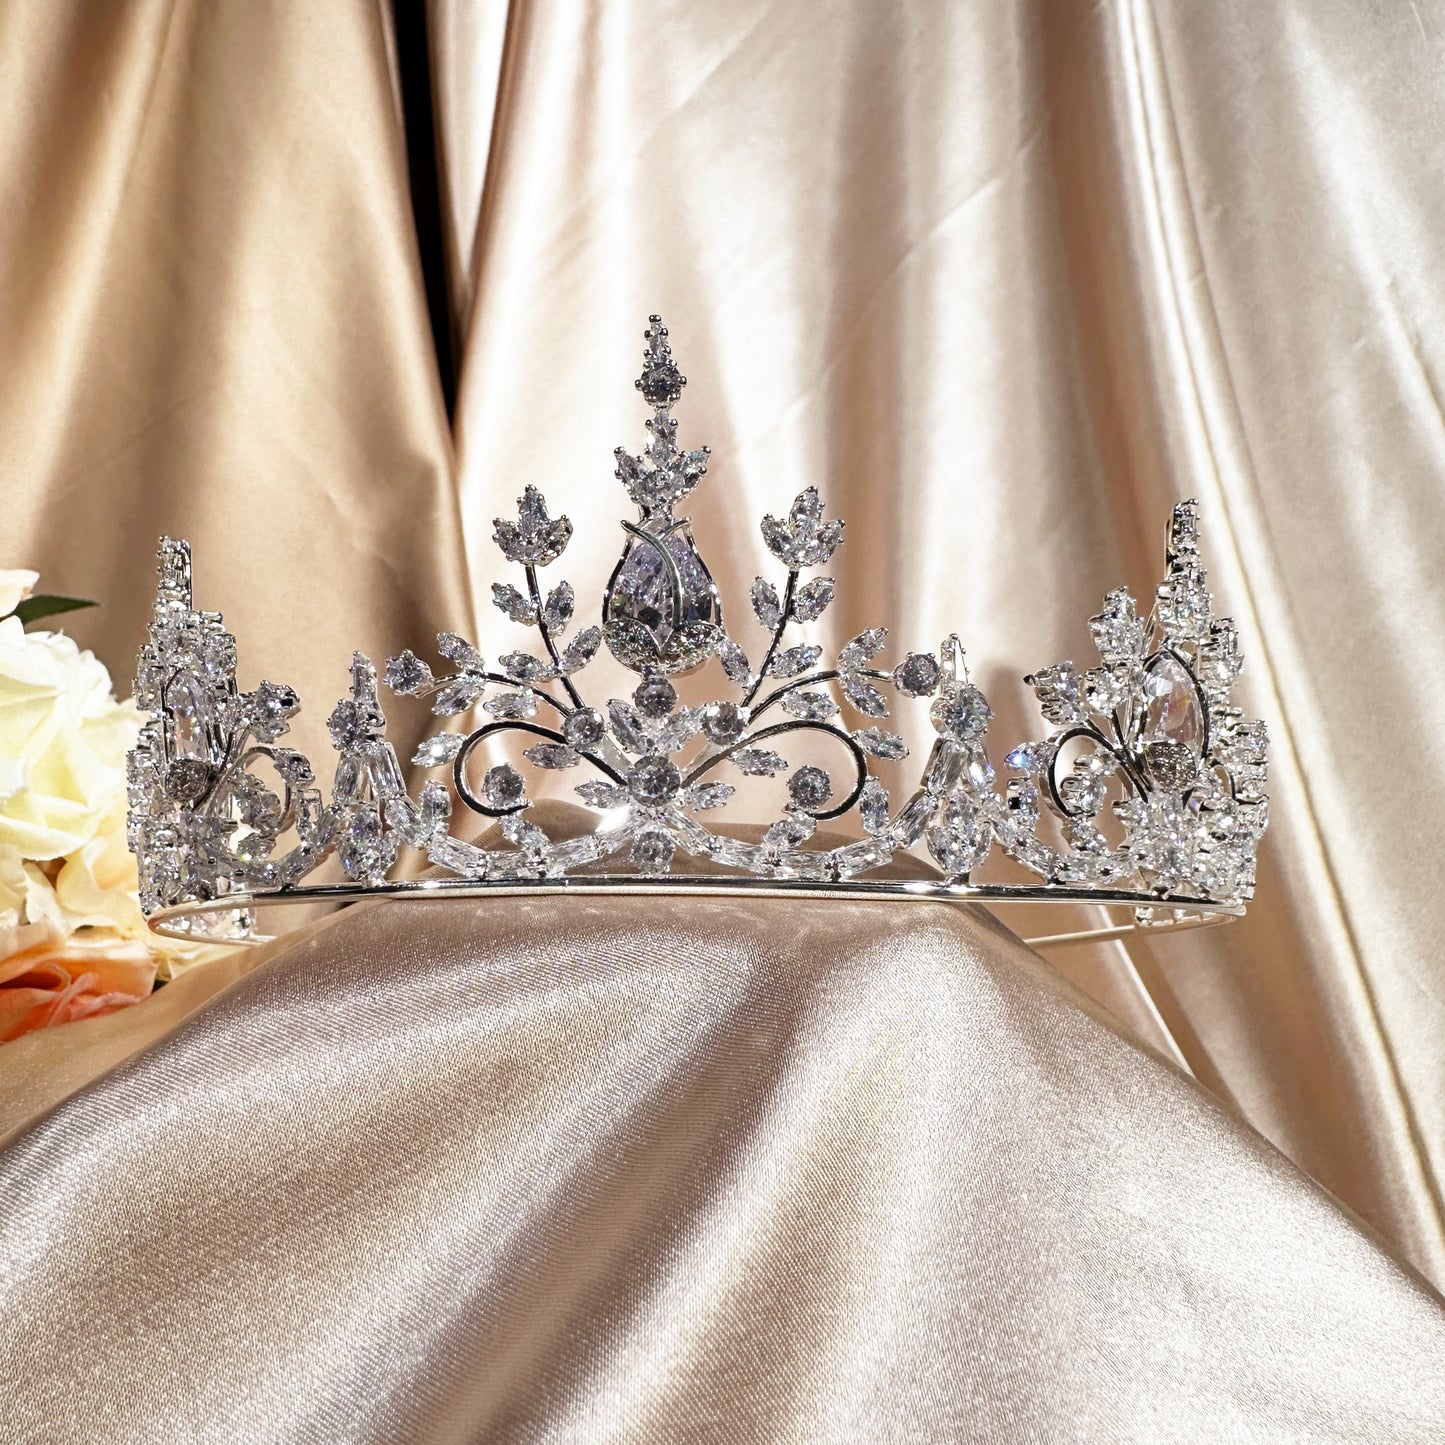 #2399873 Make a Statement with Our Exquisite Cubic Zirconia Tiara - Ideal for Pageants and Proms